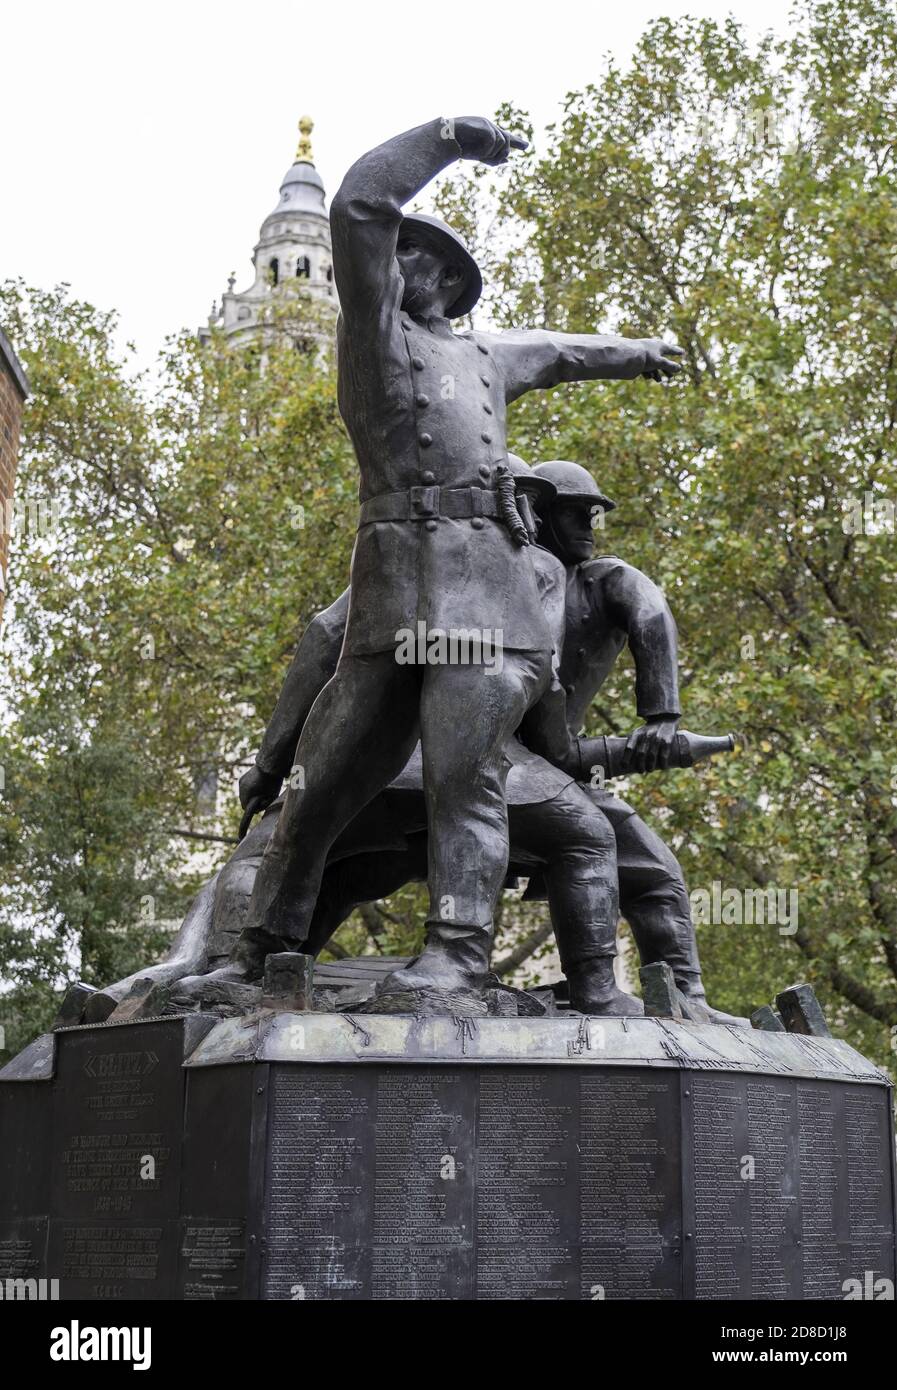 LONDON, UNITED KINGDOM - Oct 24, 2020: A memorial to the firefighters of London during the Blitz. Situated in front of St Pauls Cathedra Stock Photo